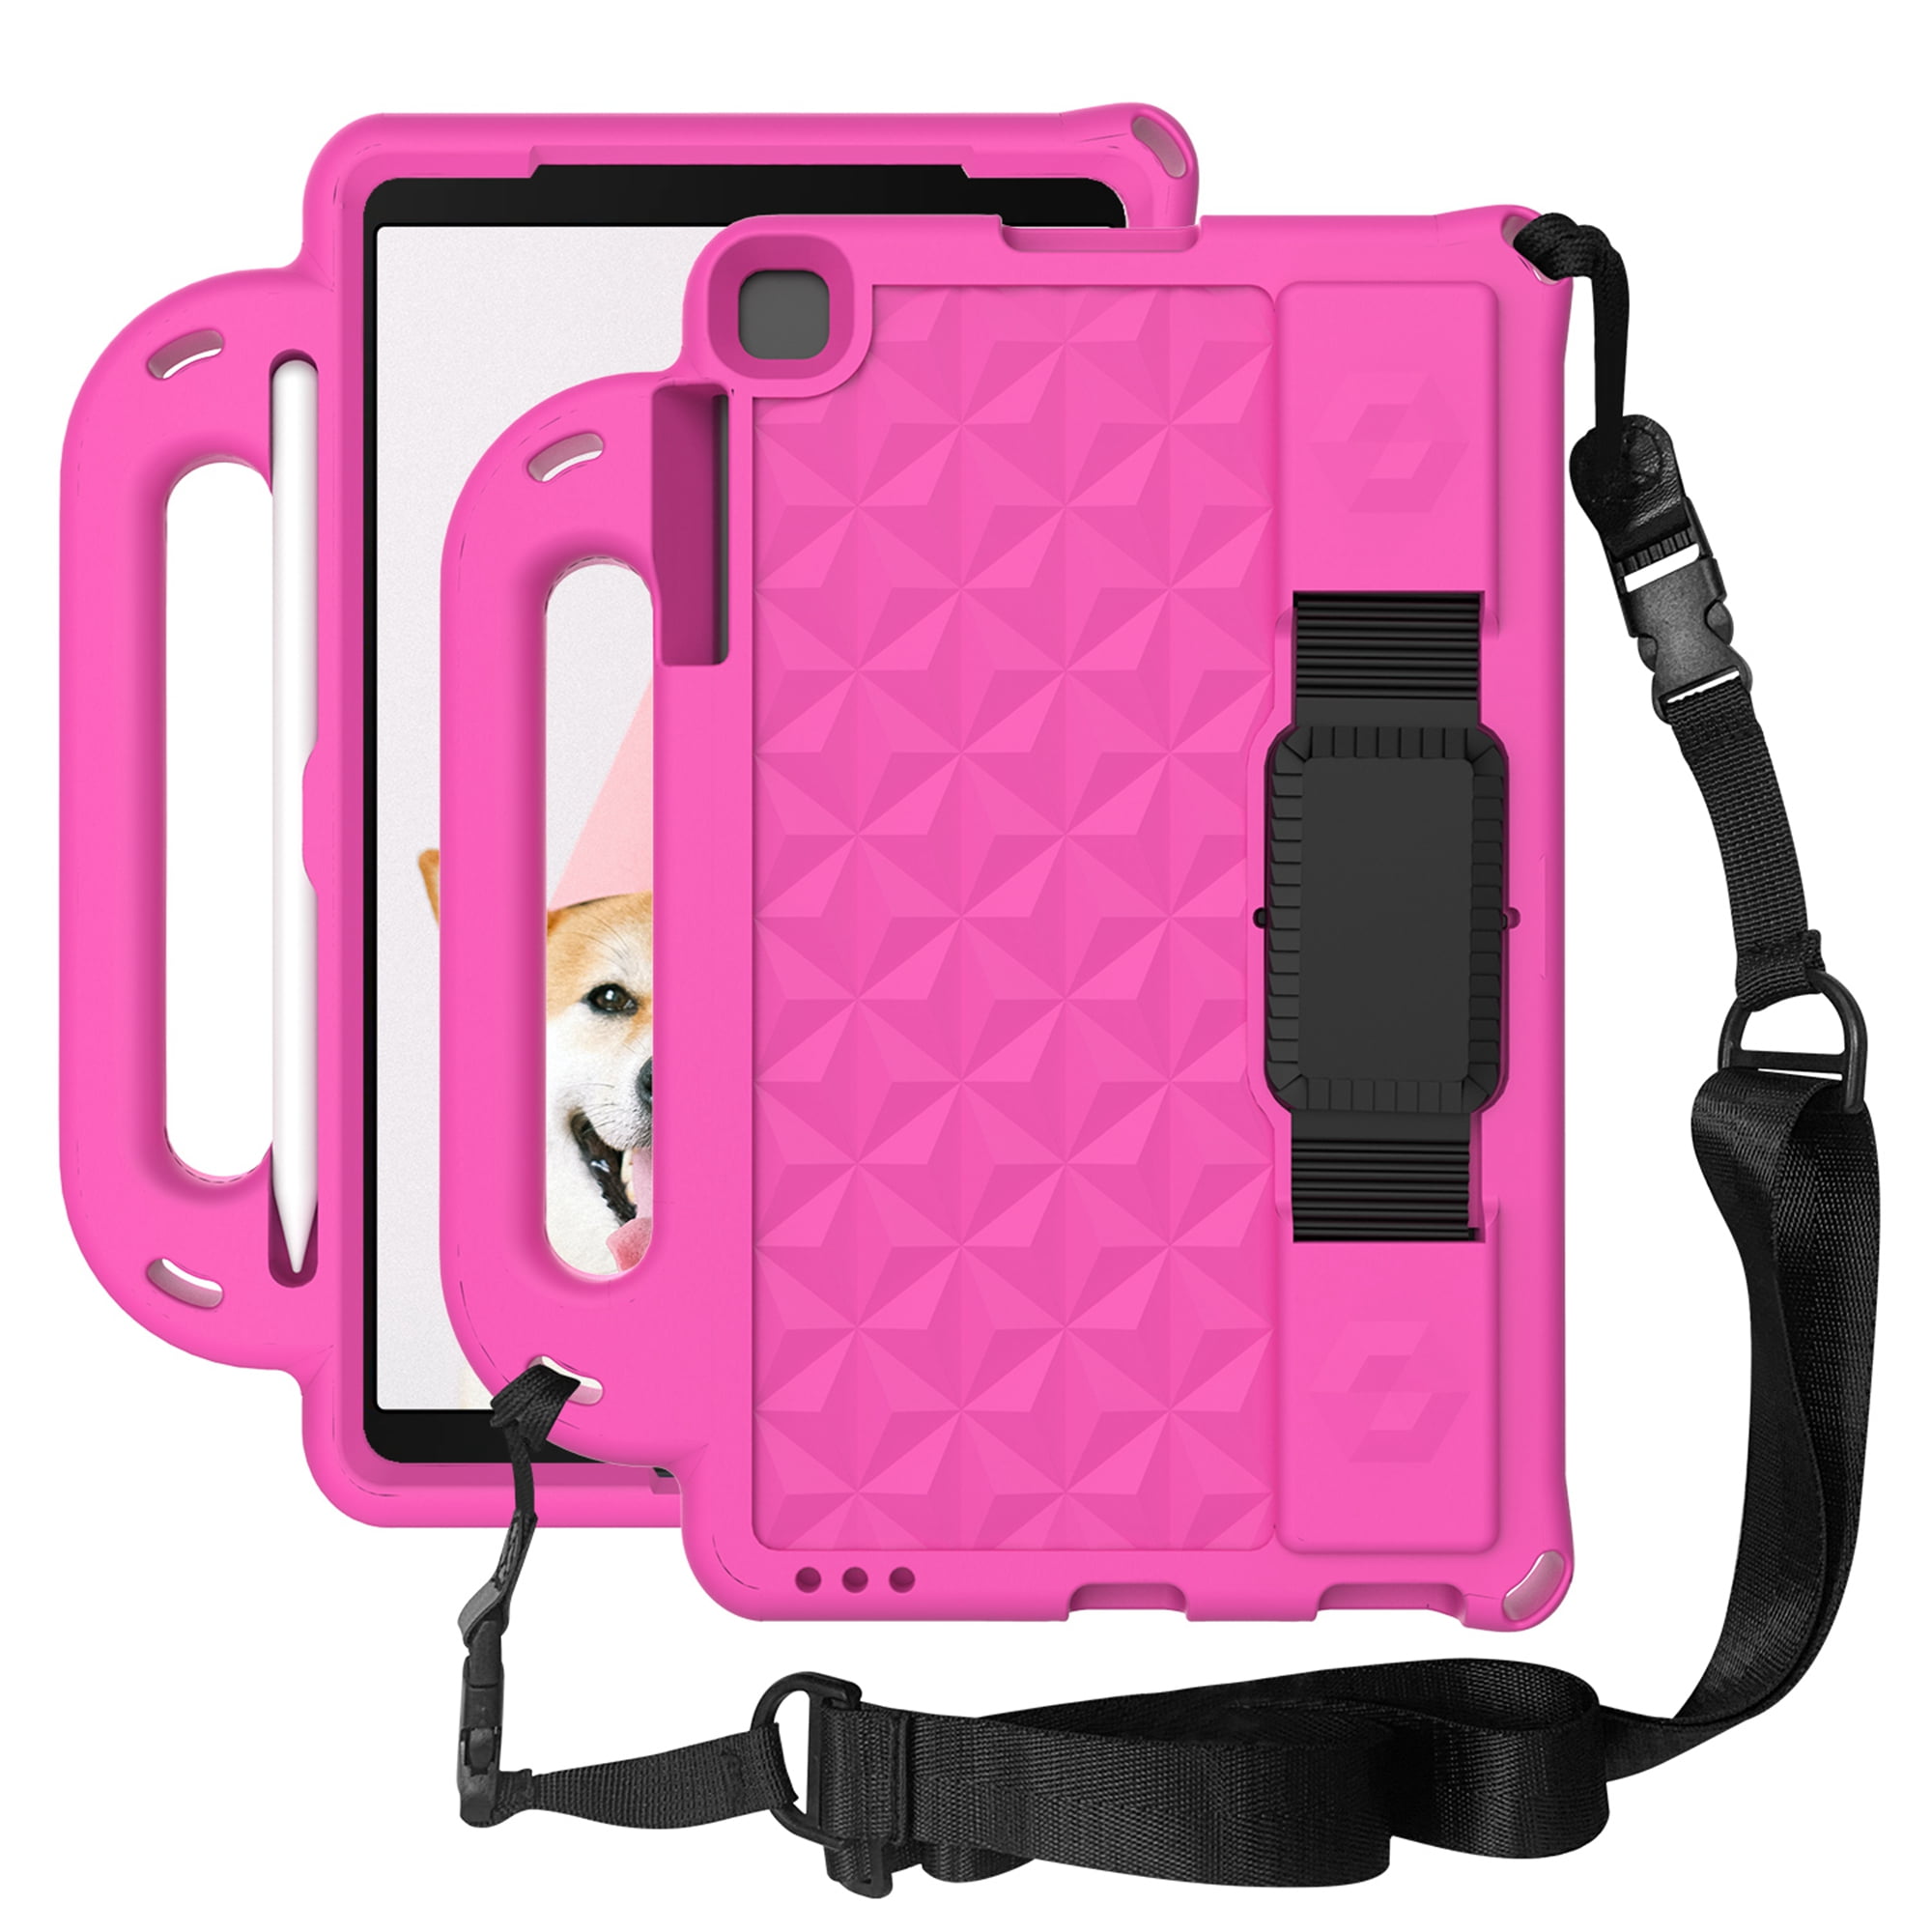 Samsung Galaxy Tab A 10.1 2019 Case for Kids, Dteck Light Weight Handle Shockproof Protective Case for Samsung Galaxy Tab A 10.1 Inch SM-T510 / T515,Rose - Walmart.com